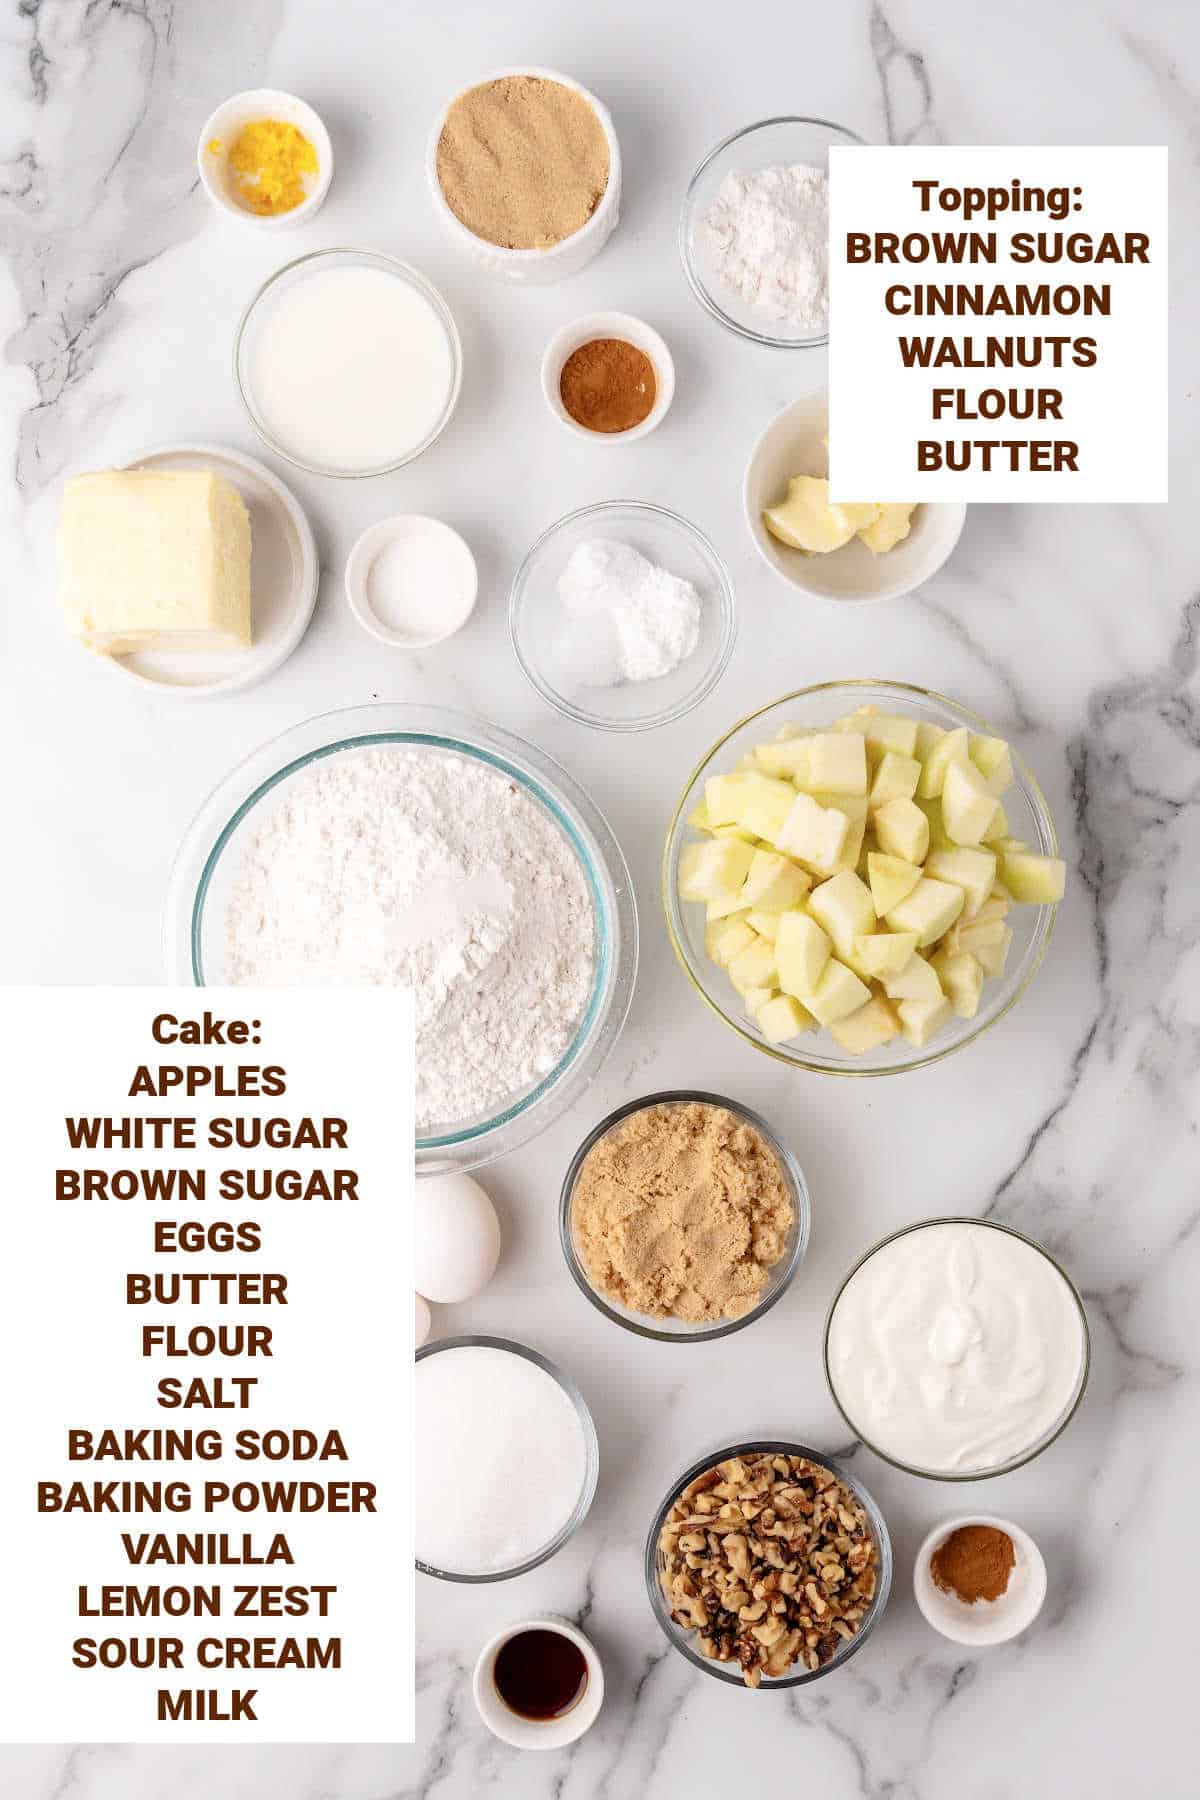 White marble surface with bowls containing ingredients for apple cinnamon walnut cake including butter, sour cream, milk, sugars, lemon, flour.